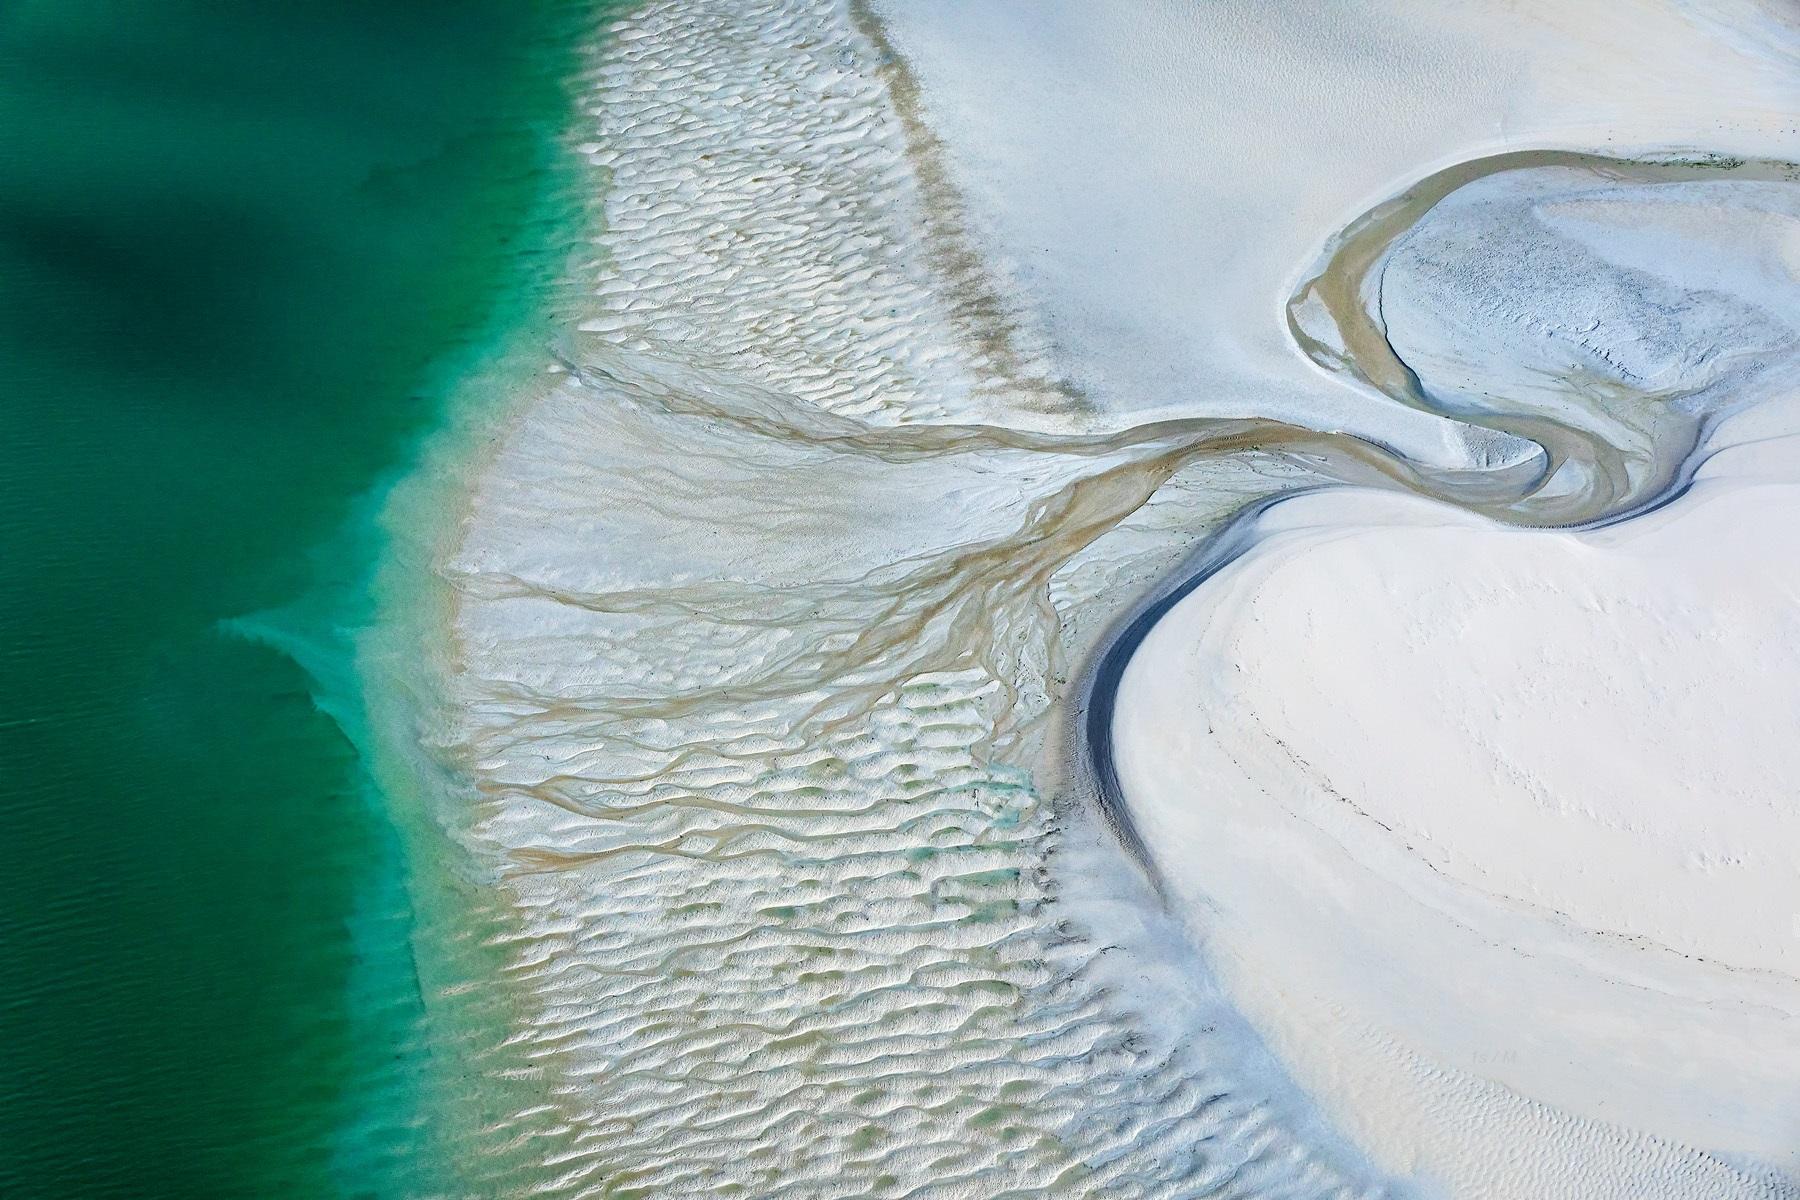 MAE Curates Landscape Photograph - 20x30in. image Aerial Photography of Earth, Land, Sea - framed, ready to hang